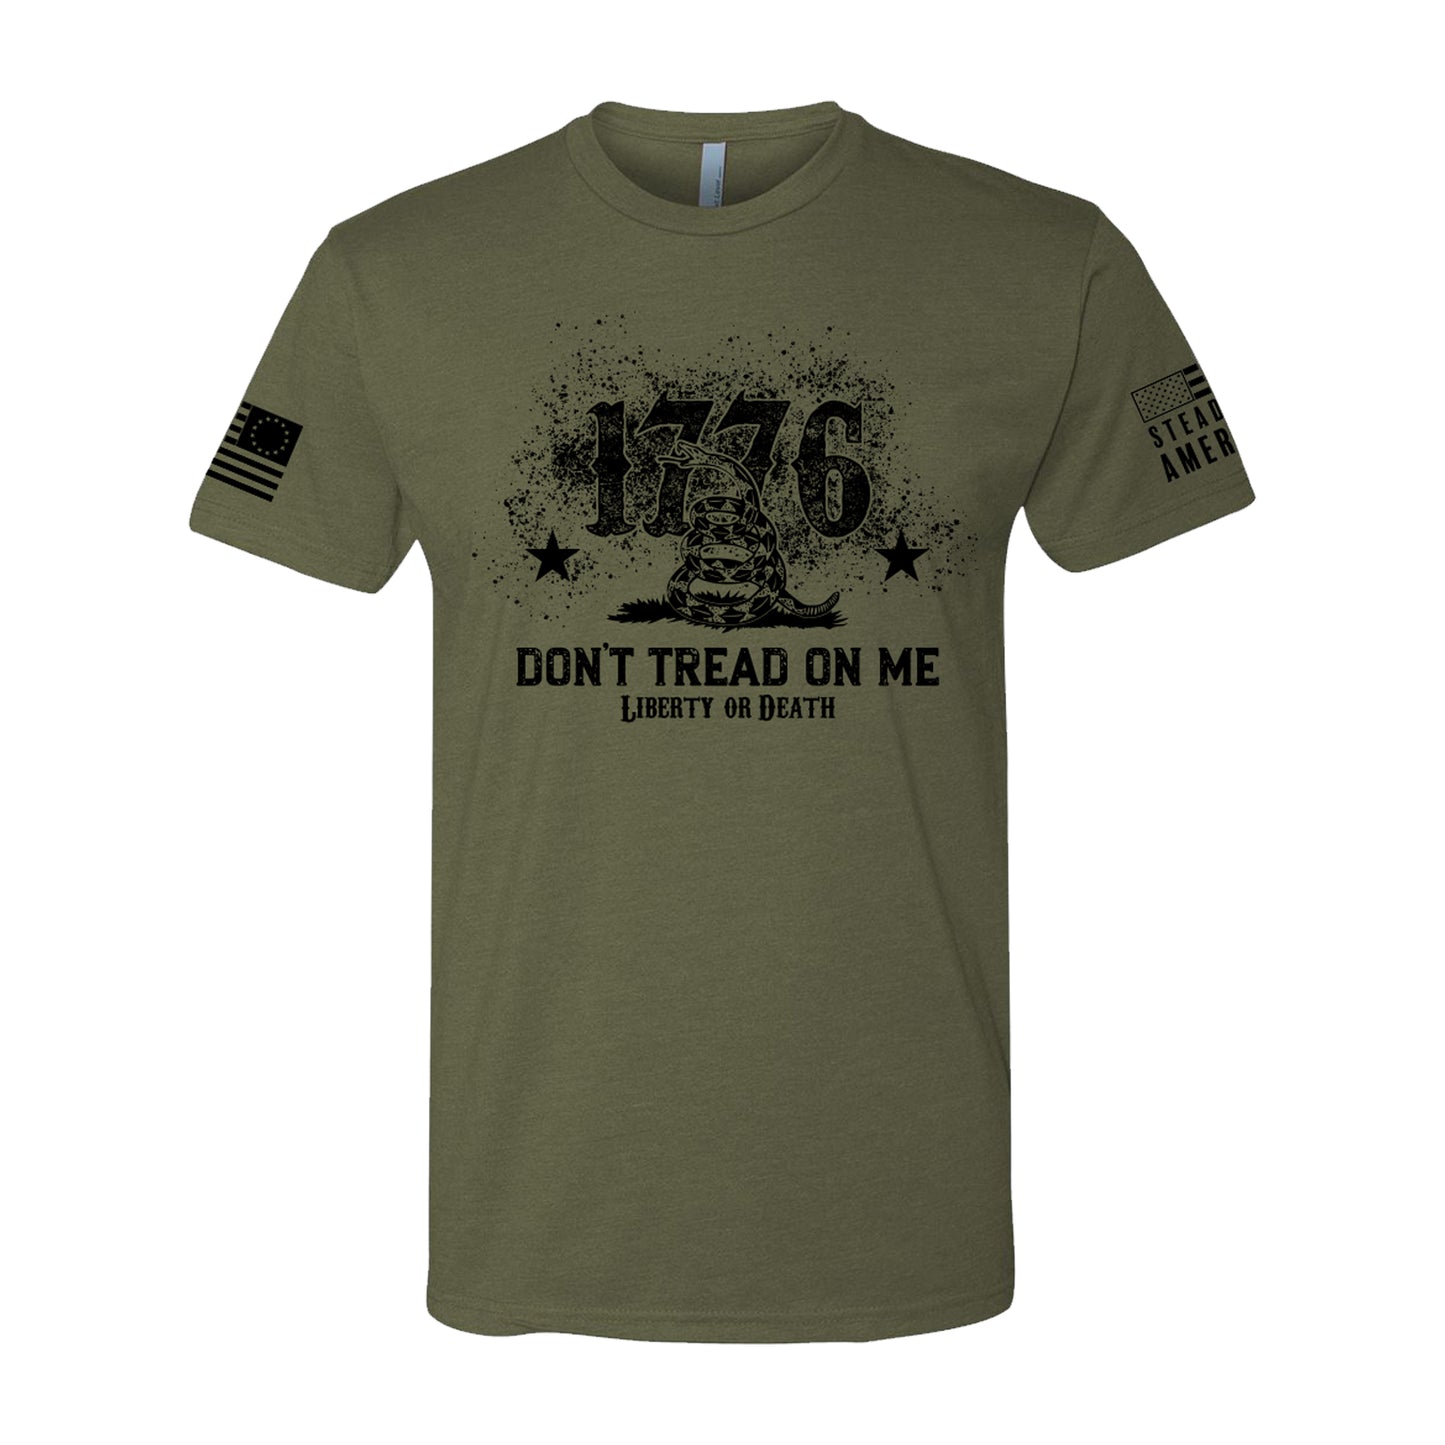 Don't Tread on Me, Short Sleeve, Military Green